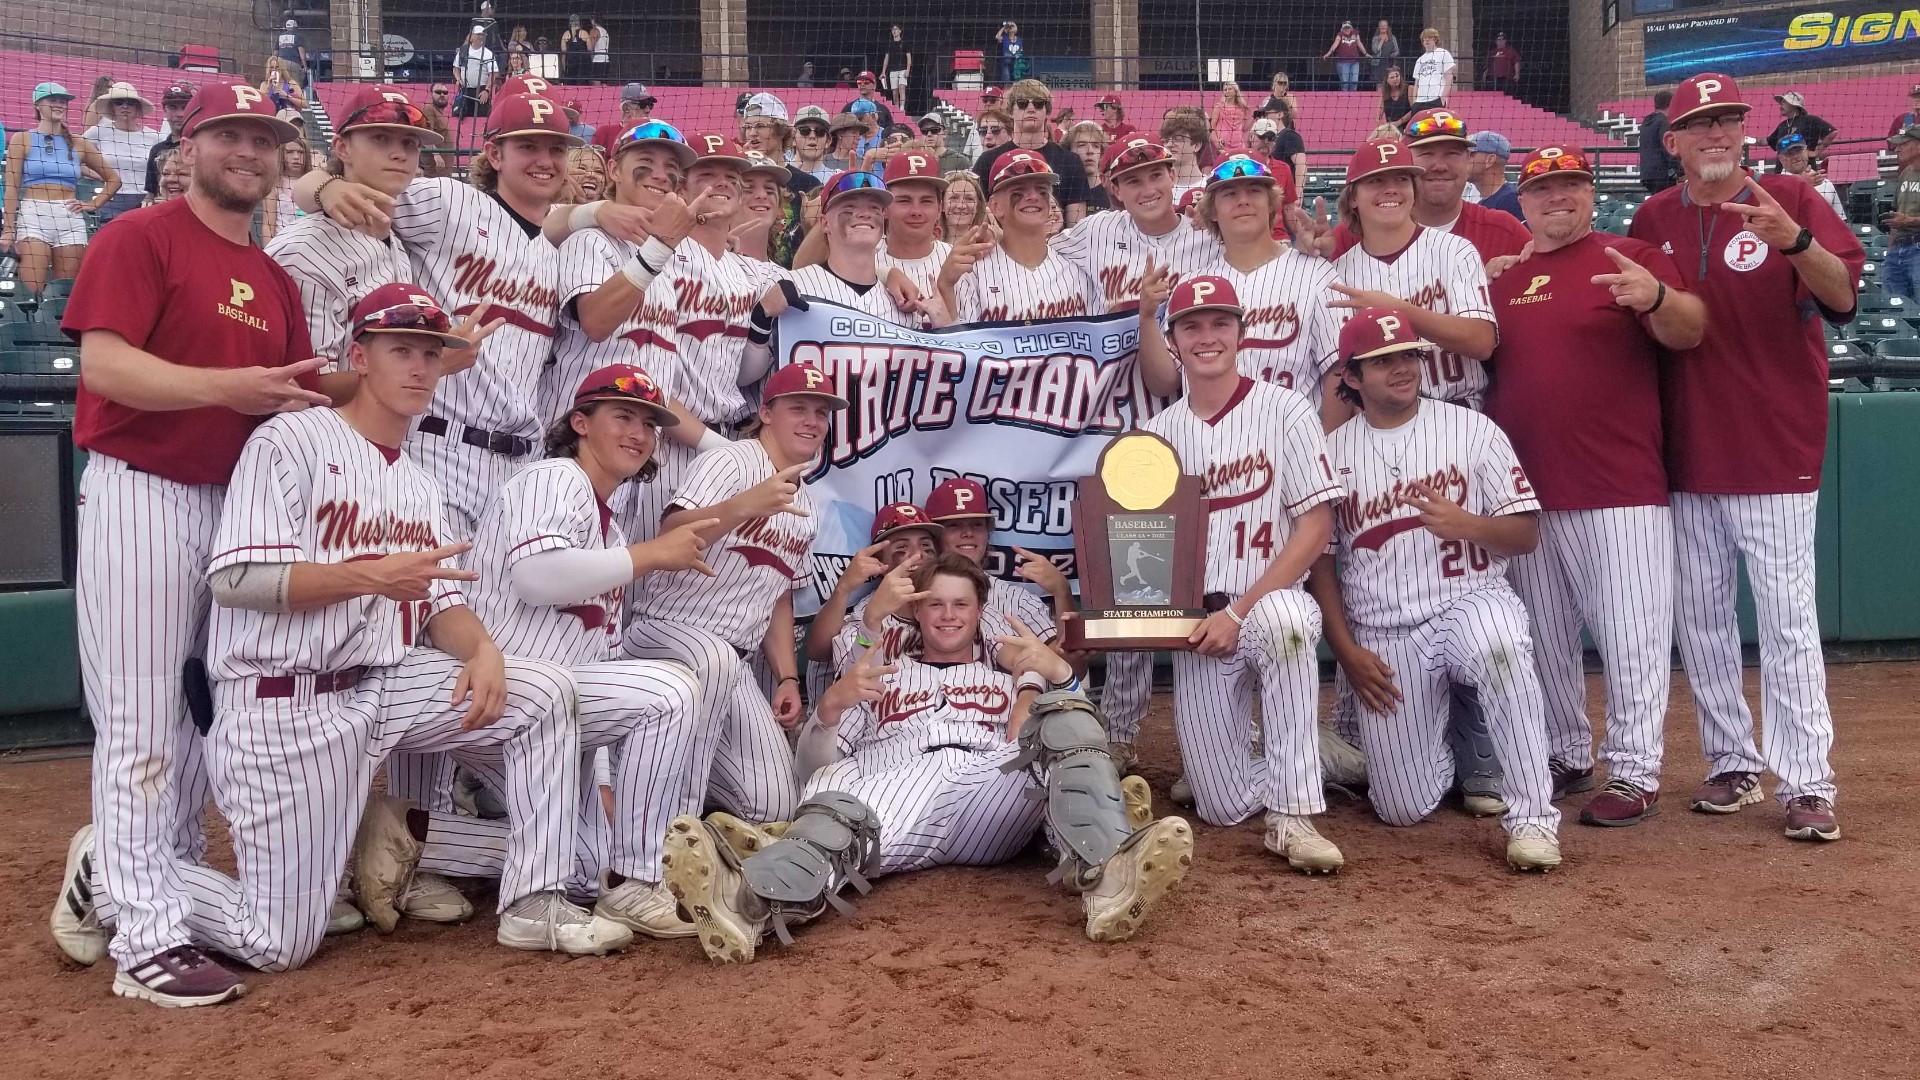 The Mustangs defeated Cheyenne Mountain 11-1 in the Class 4A baseball state title game on Saturday afternoon.